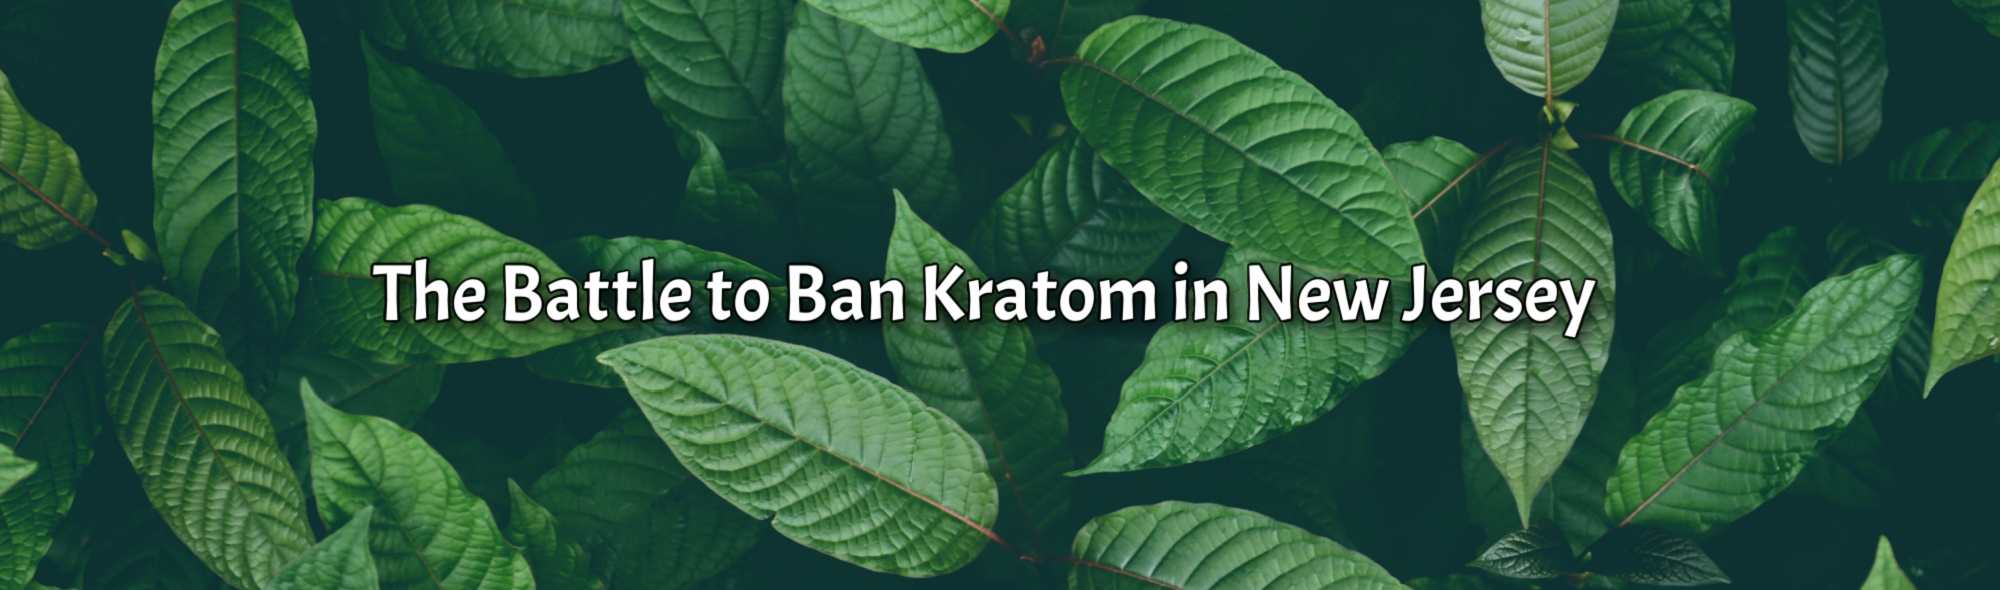 image of the battle to ban kratom in new jersey